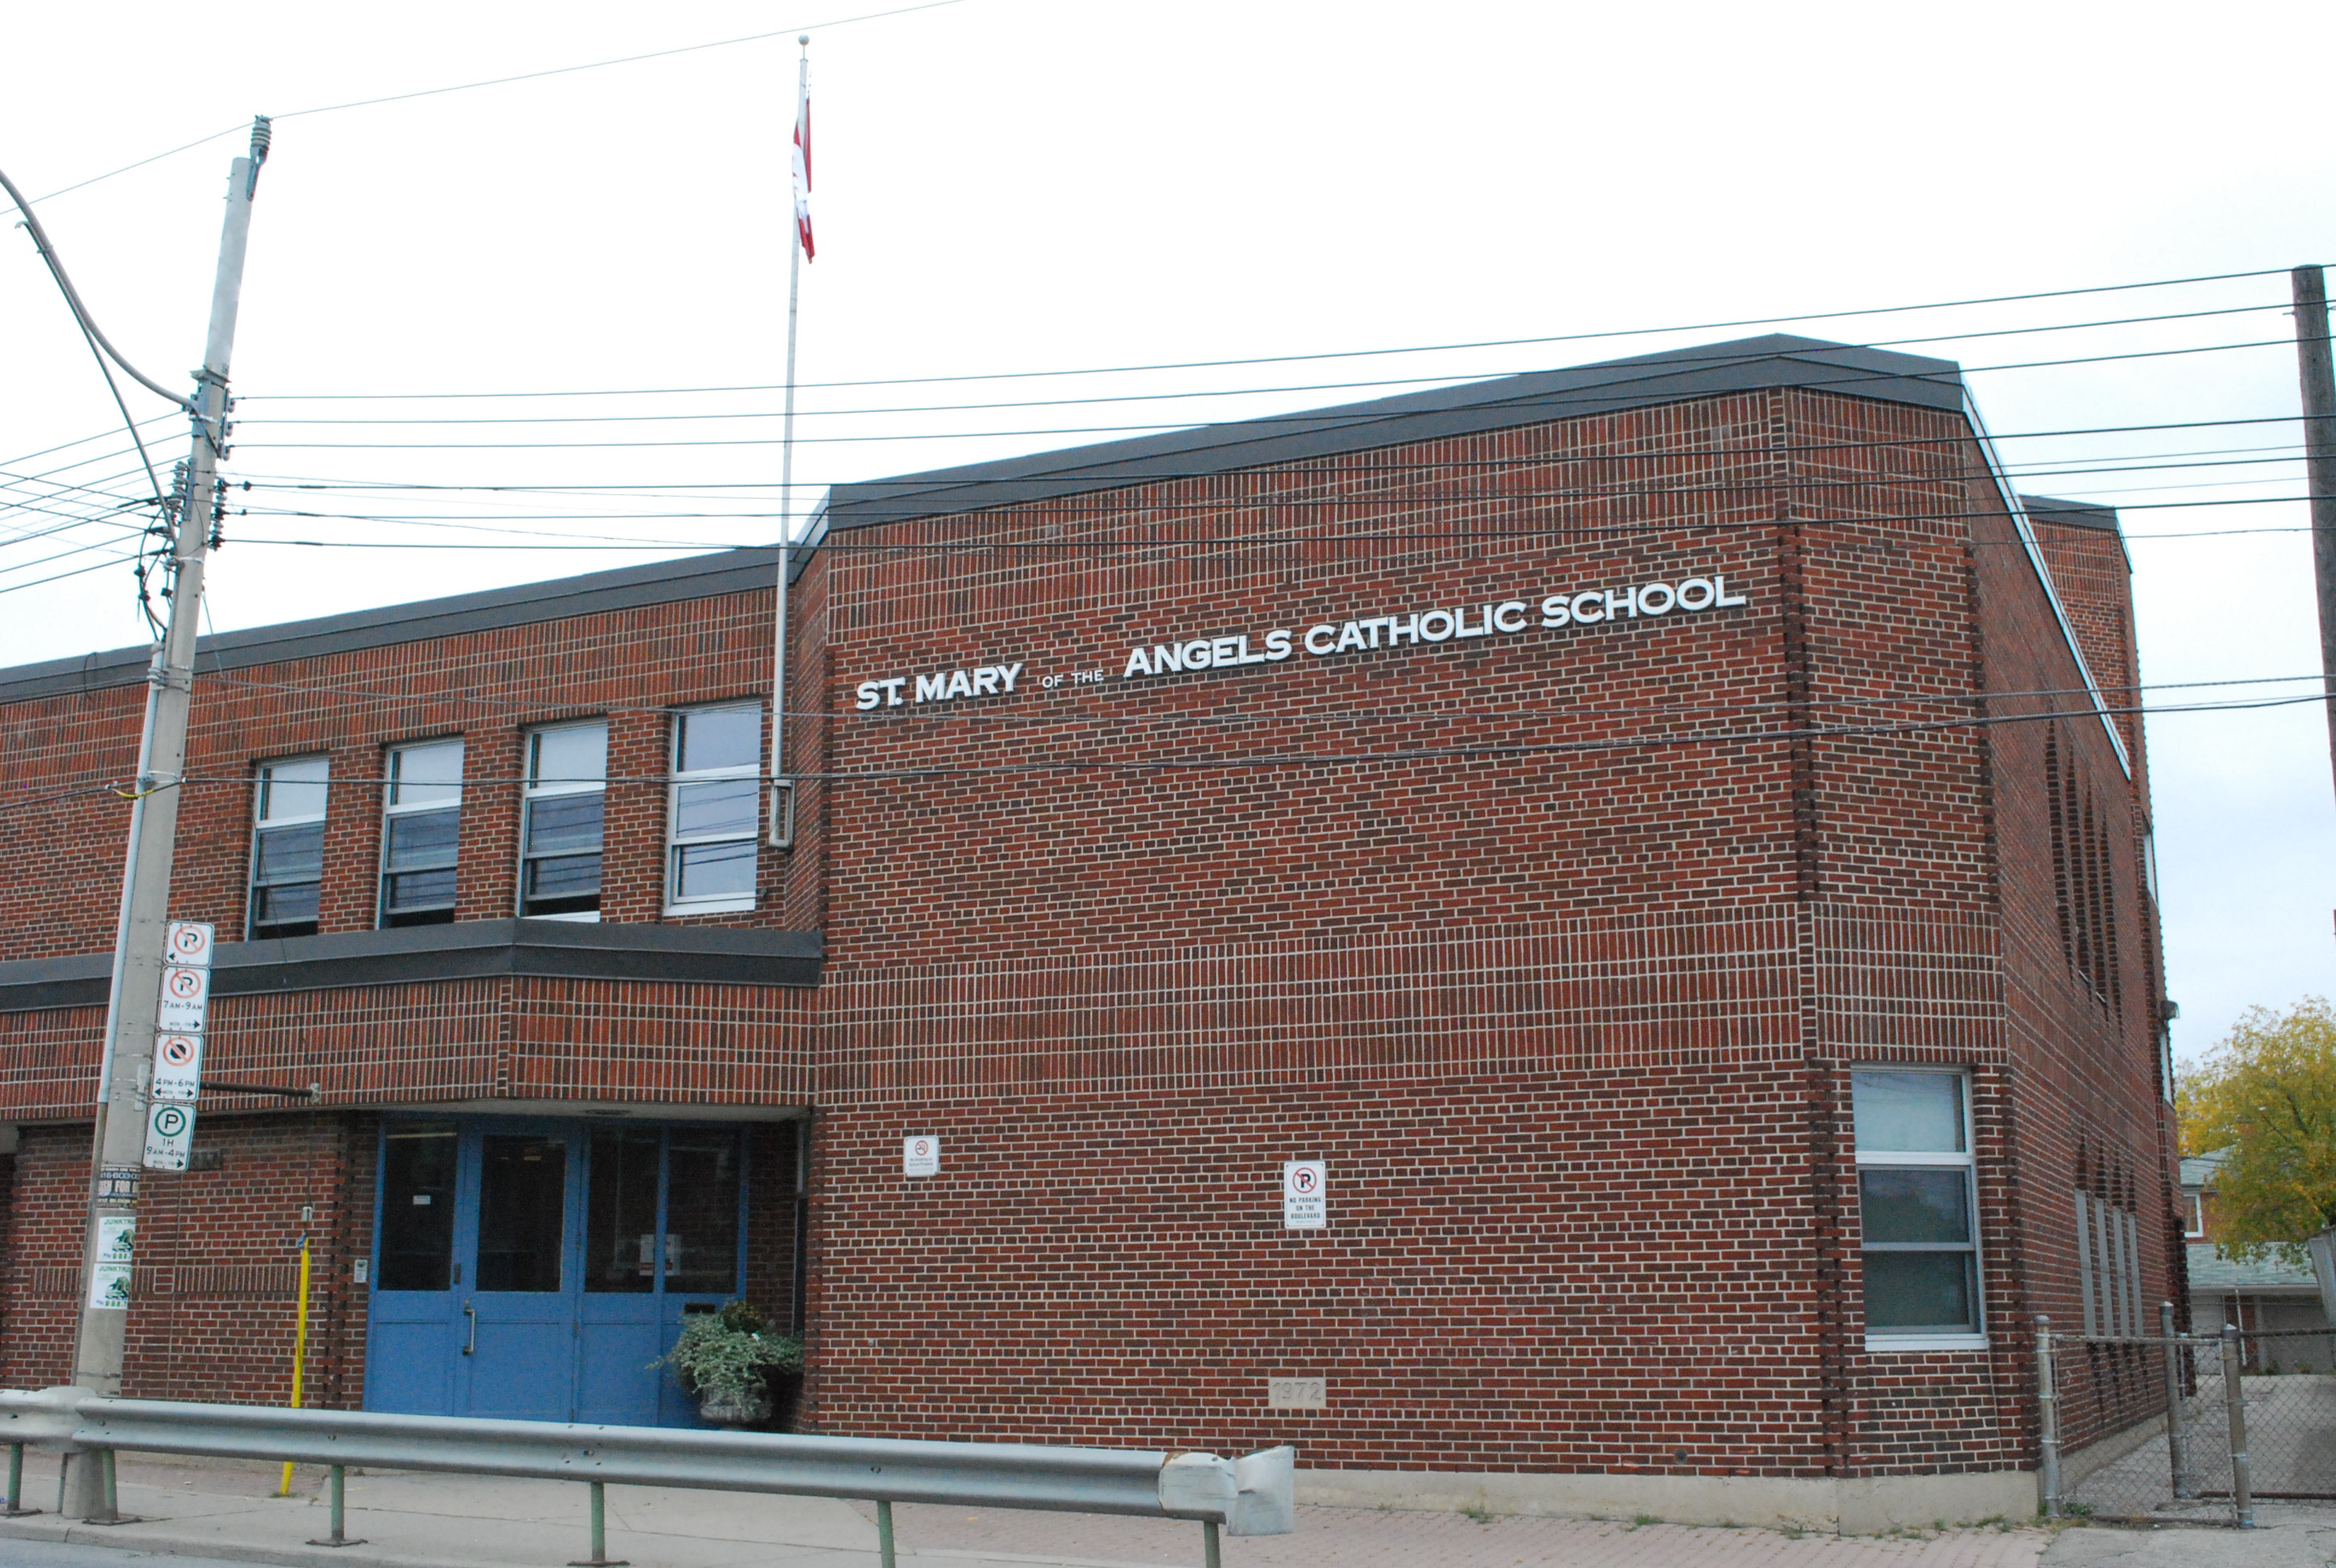 The front of the St. Mary of the Angels Catholic School building